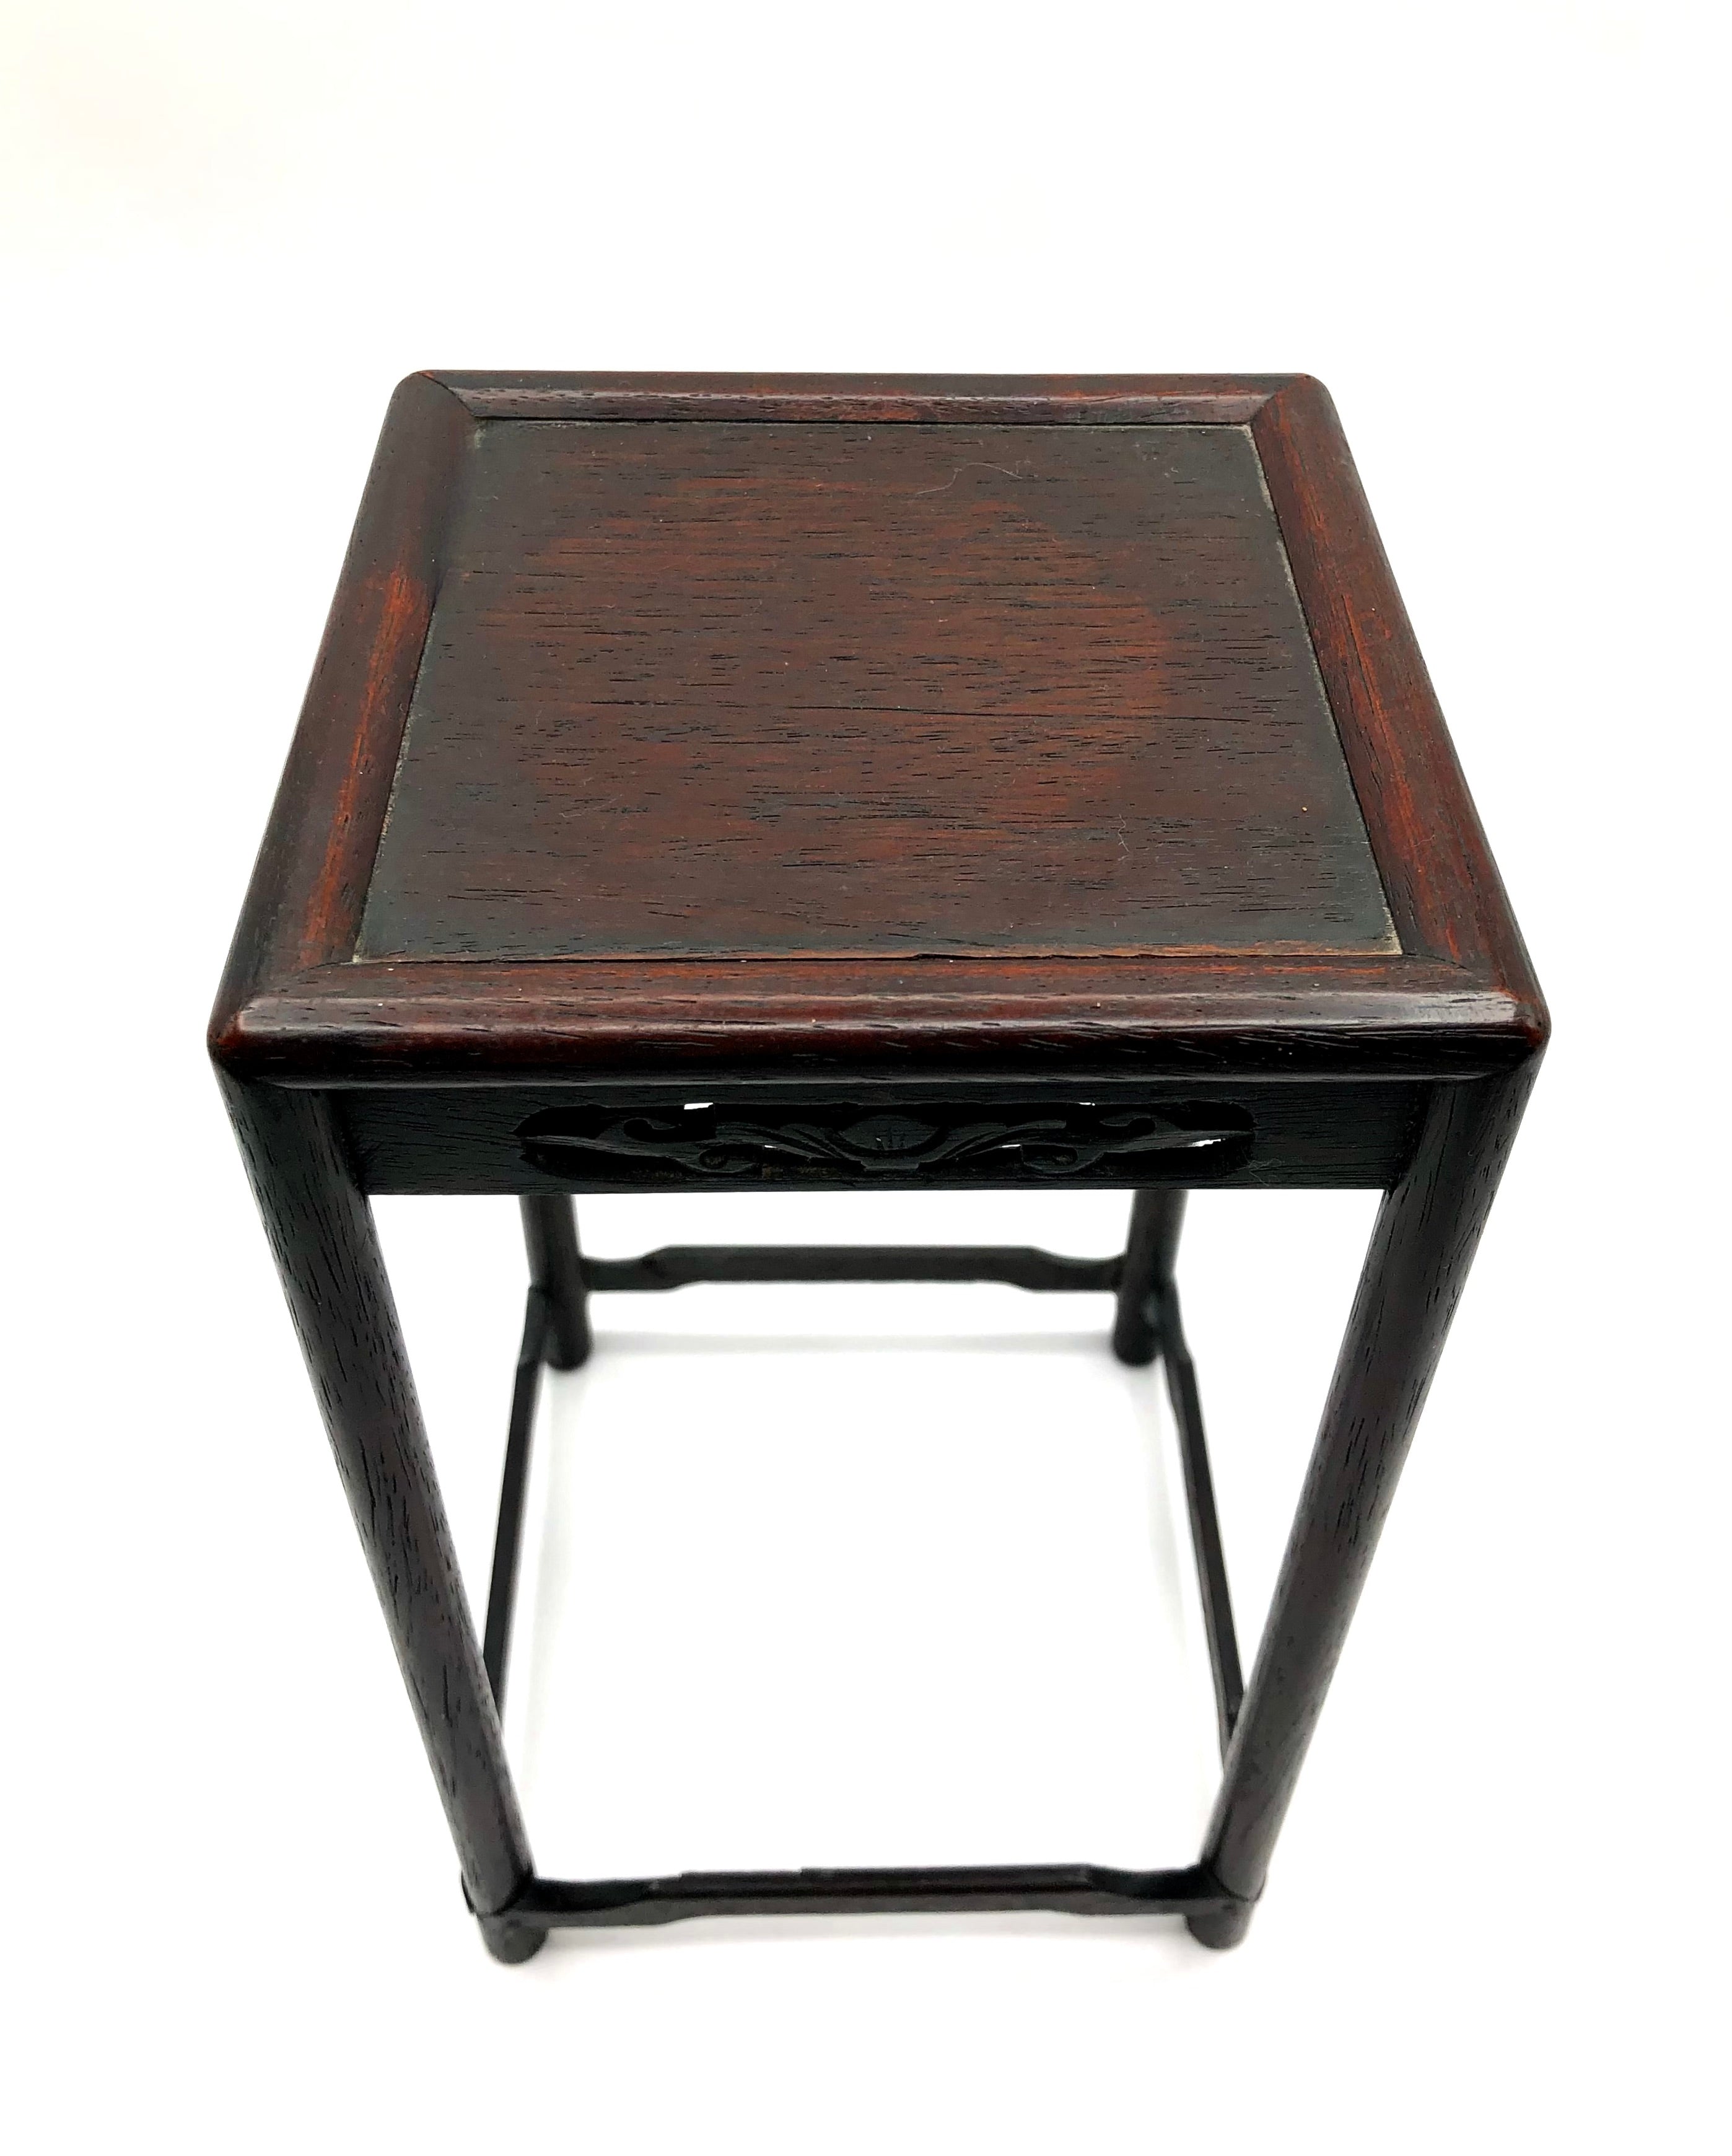 Antique Japanese Rosewood Display Stand | Fine Art display Table